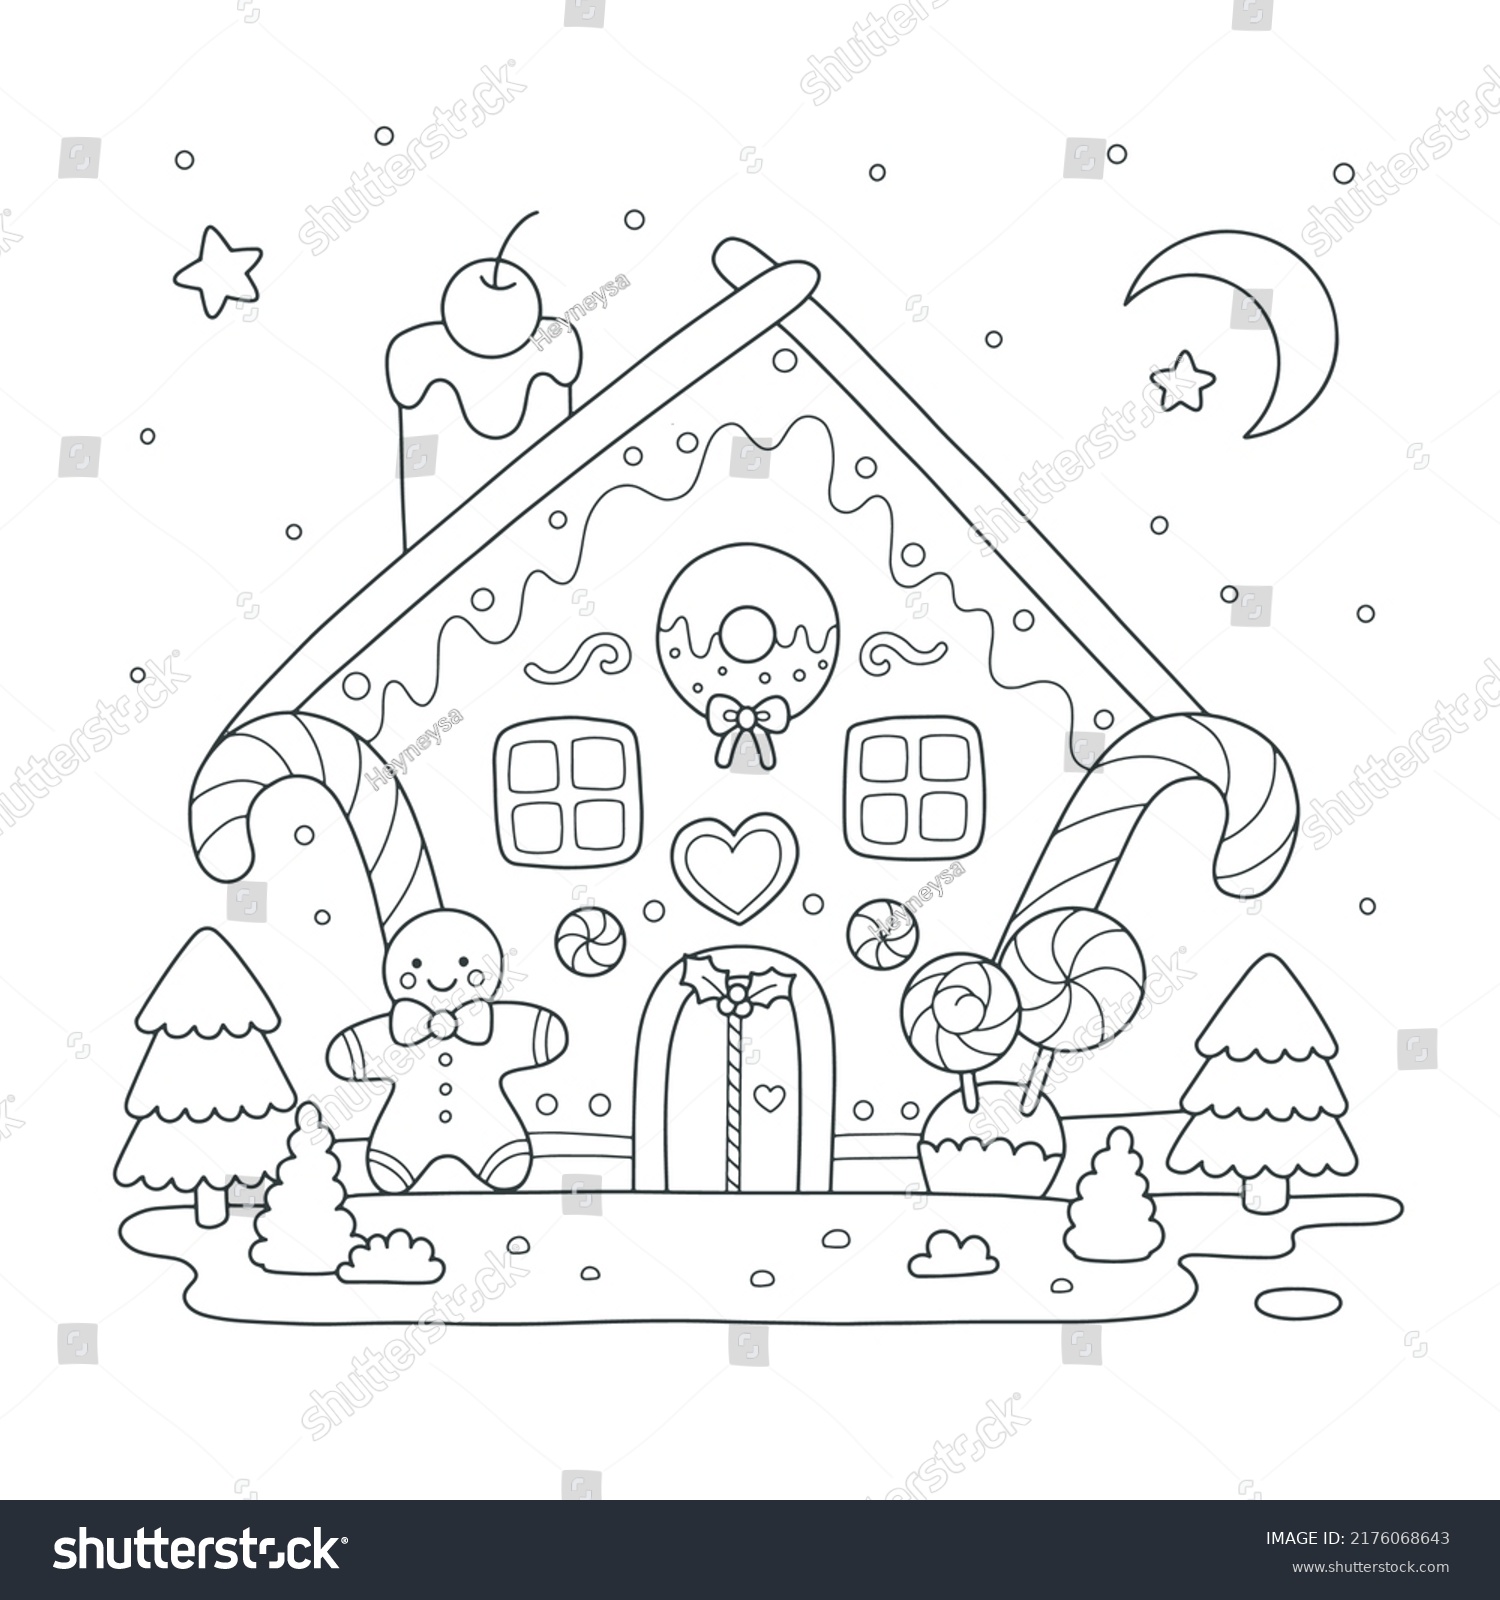 Thousand christmas house coloring book royalty